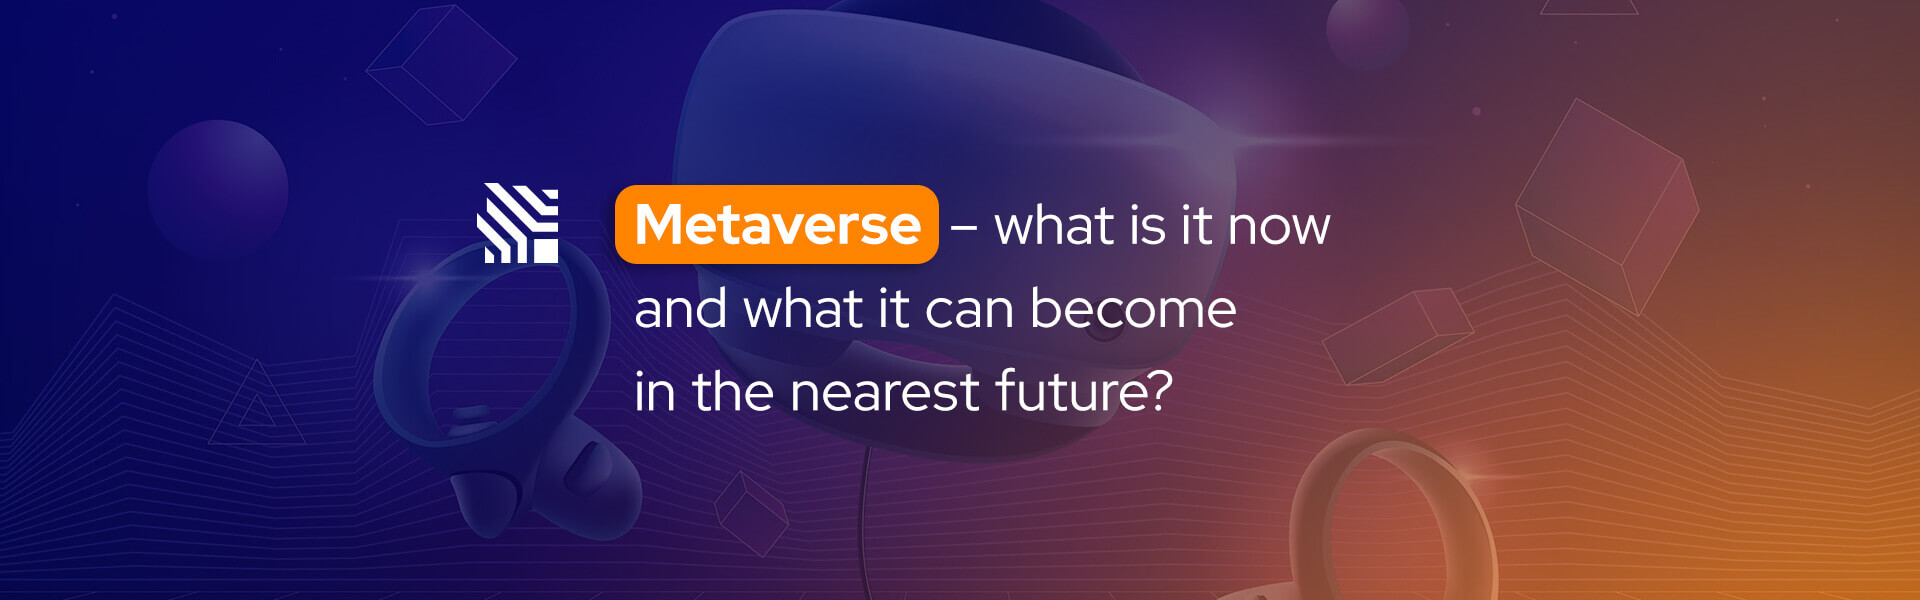 Metaverse - what is it now and what it can become in the nearest future?